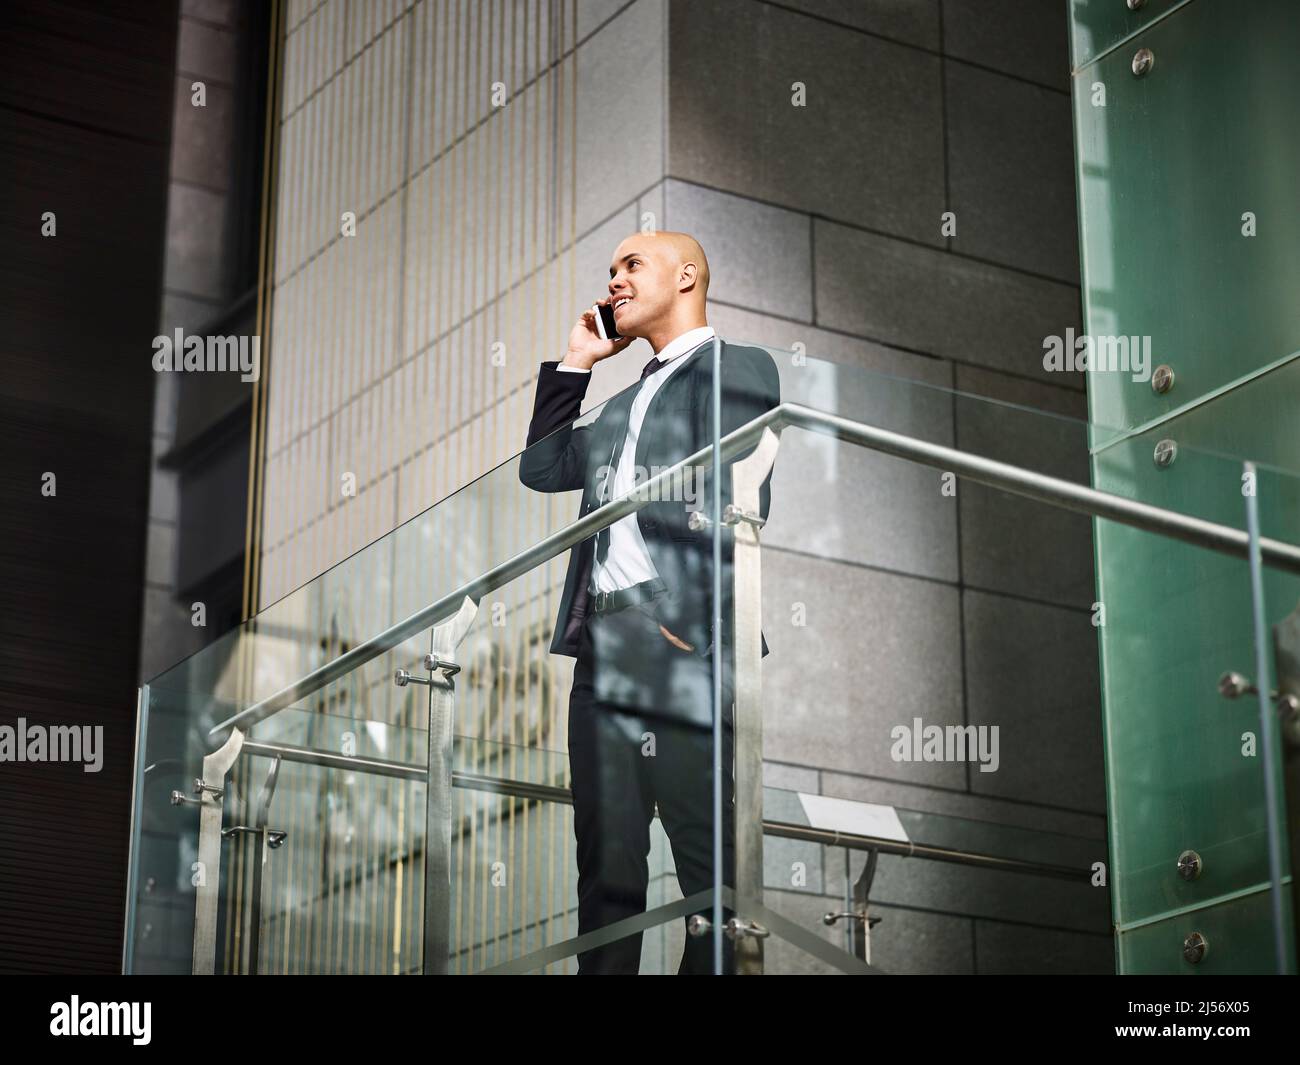 young latino corporate business man standing on top of stairs making a call using cellphone in modern office building Stock Photo